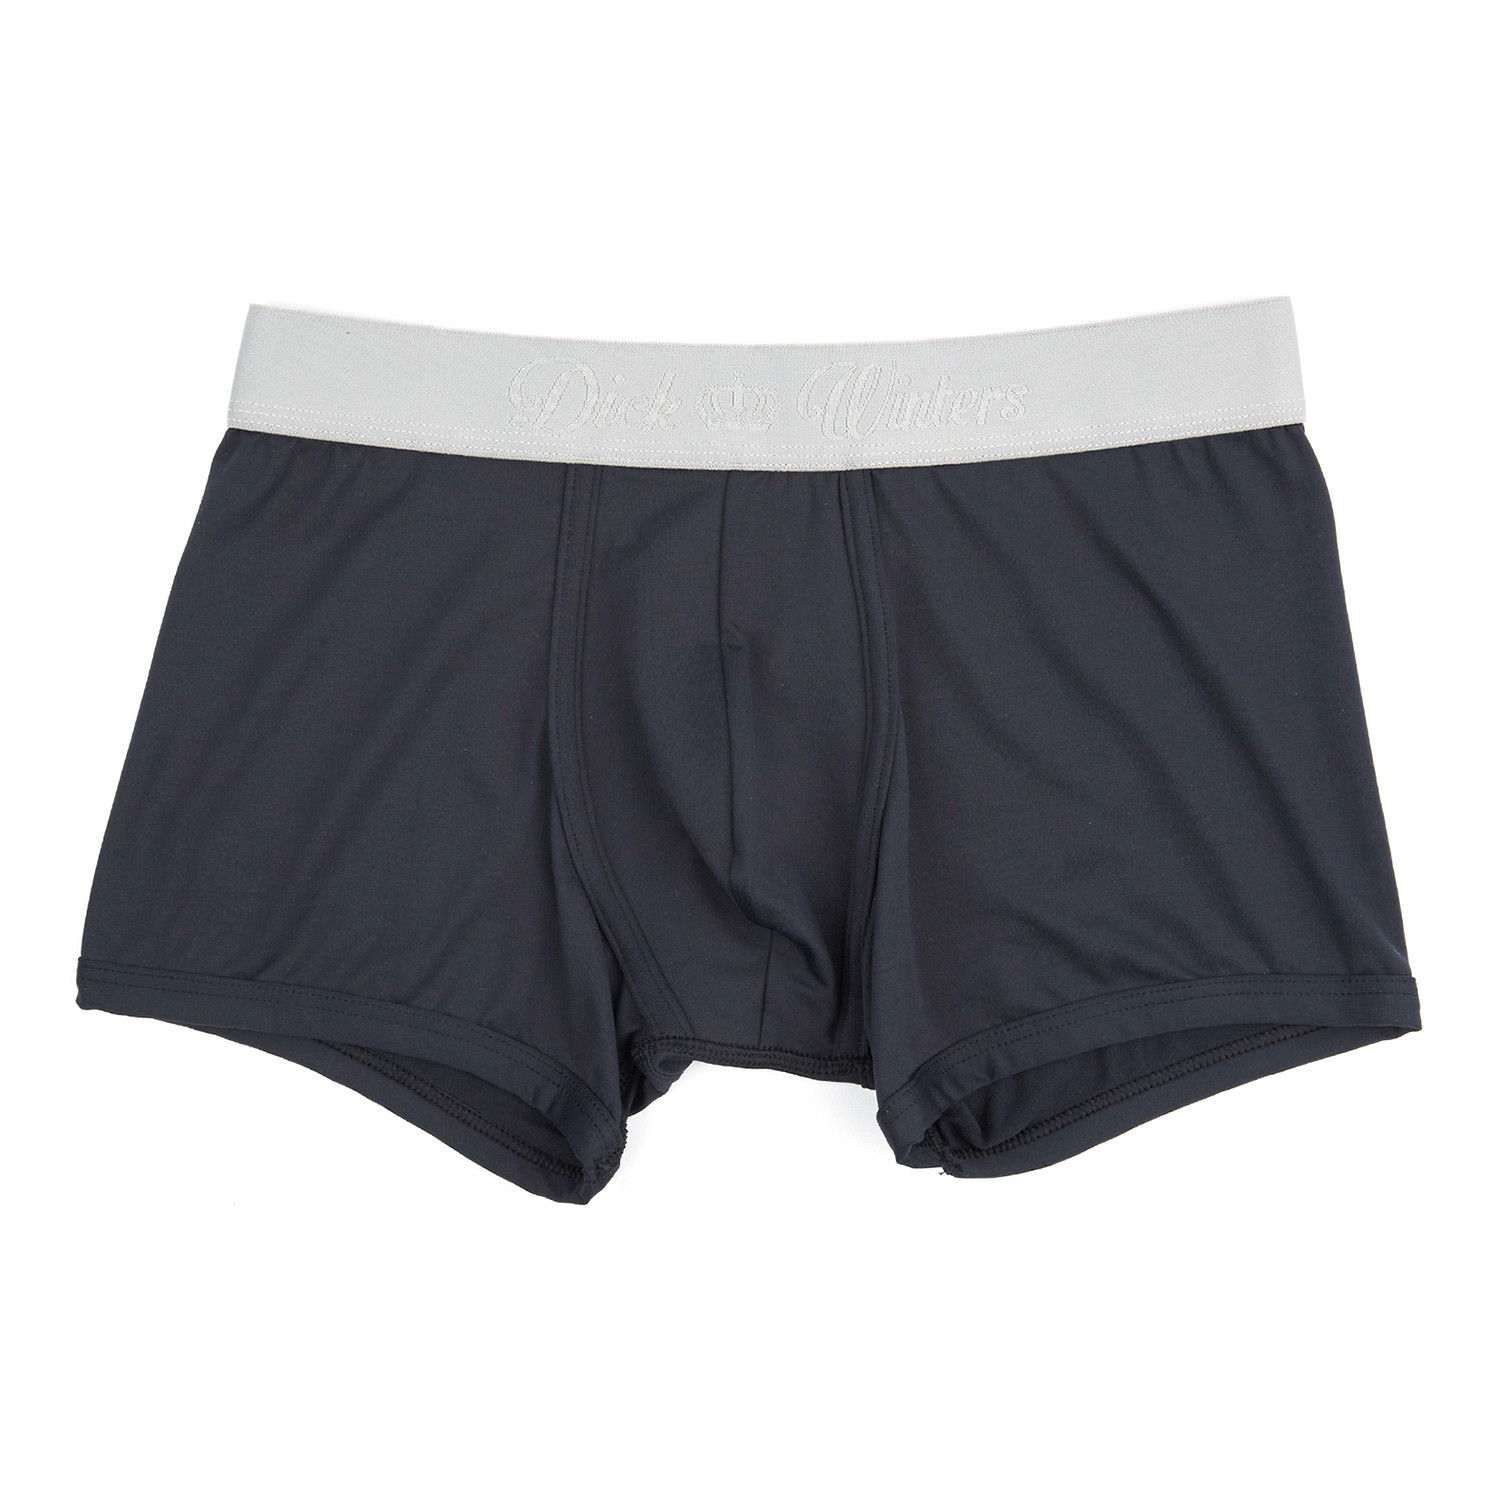 Classic Dick Boxer Short // Black (S) - Dick Winters - Touch of Modern